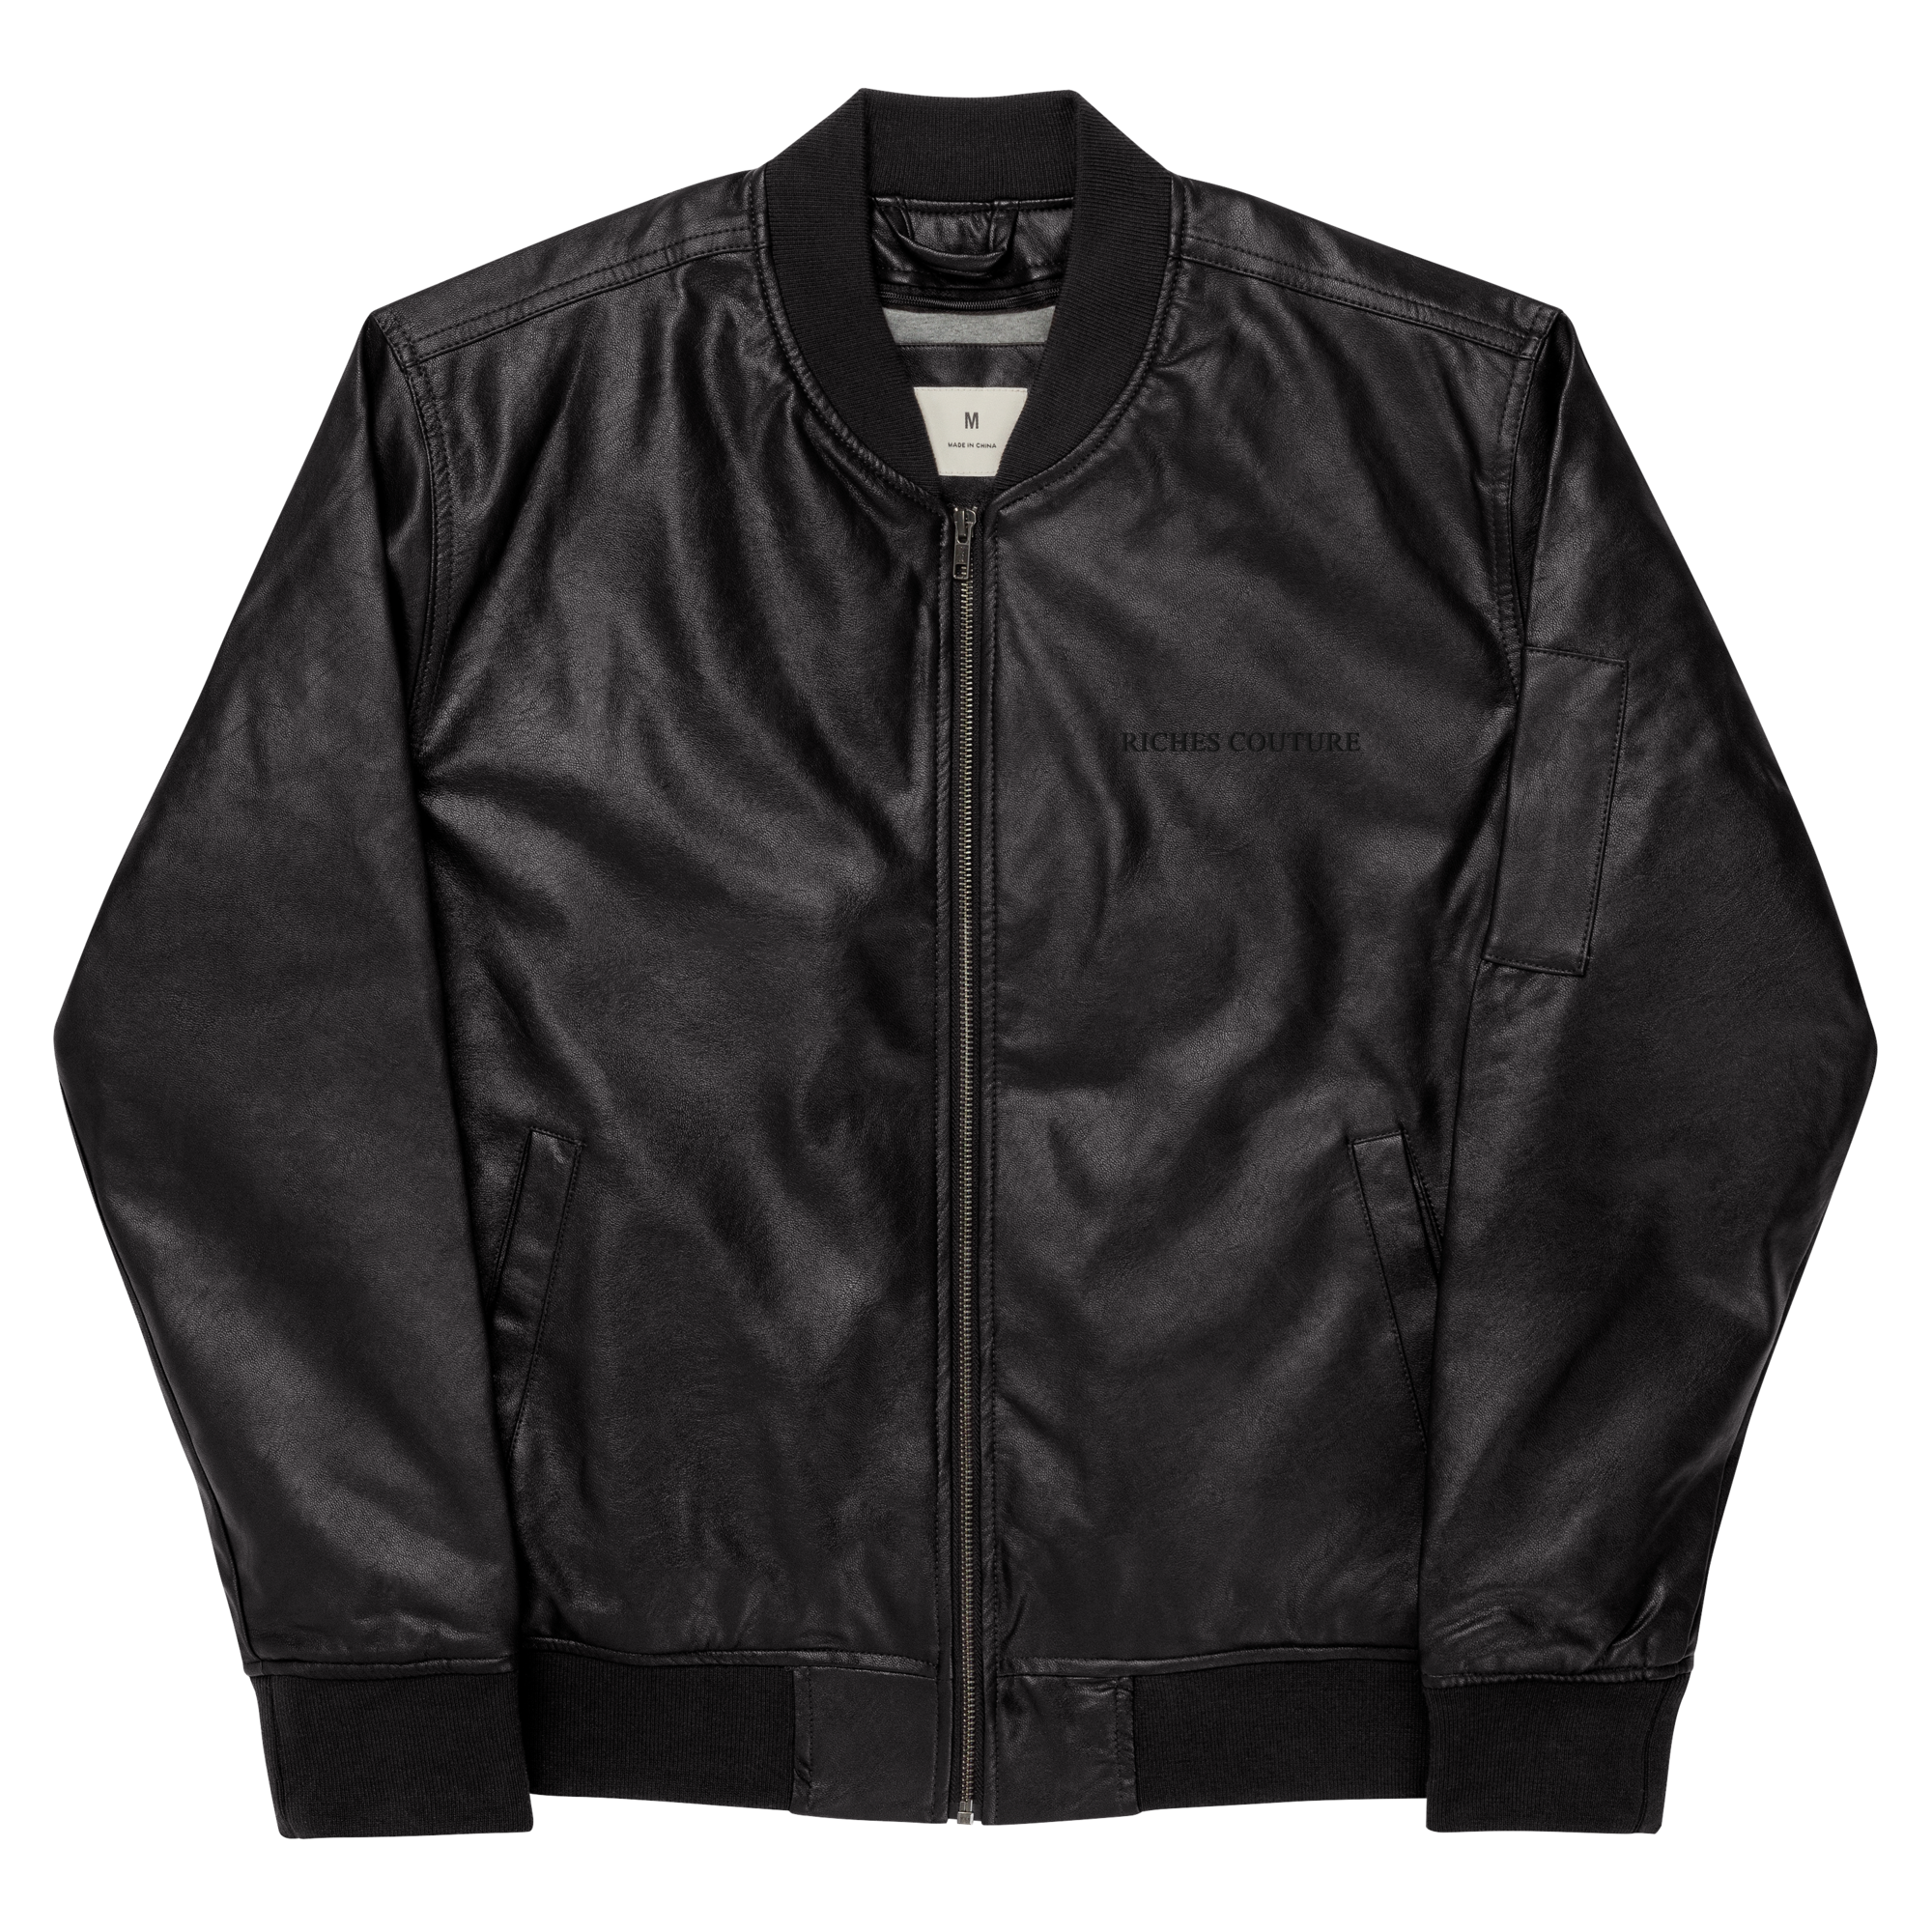 Riches Couture Black  Leather Bomber Jacket